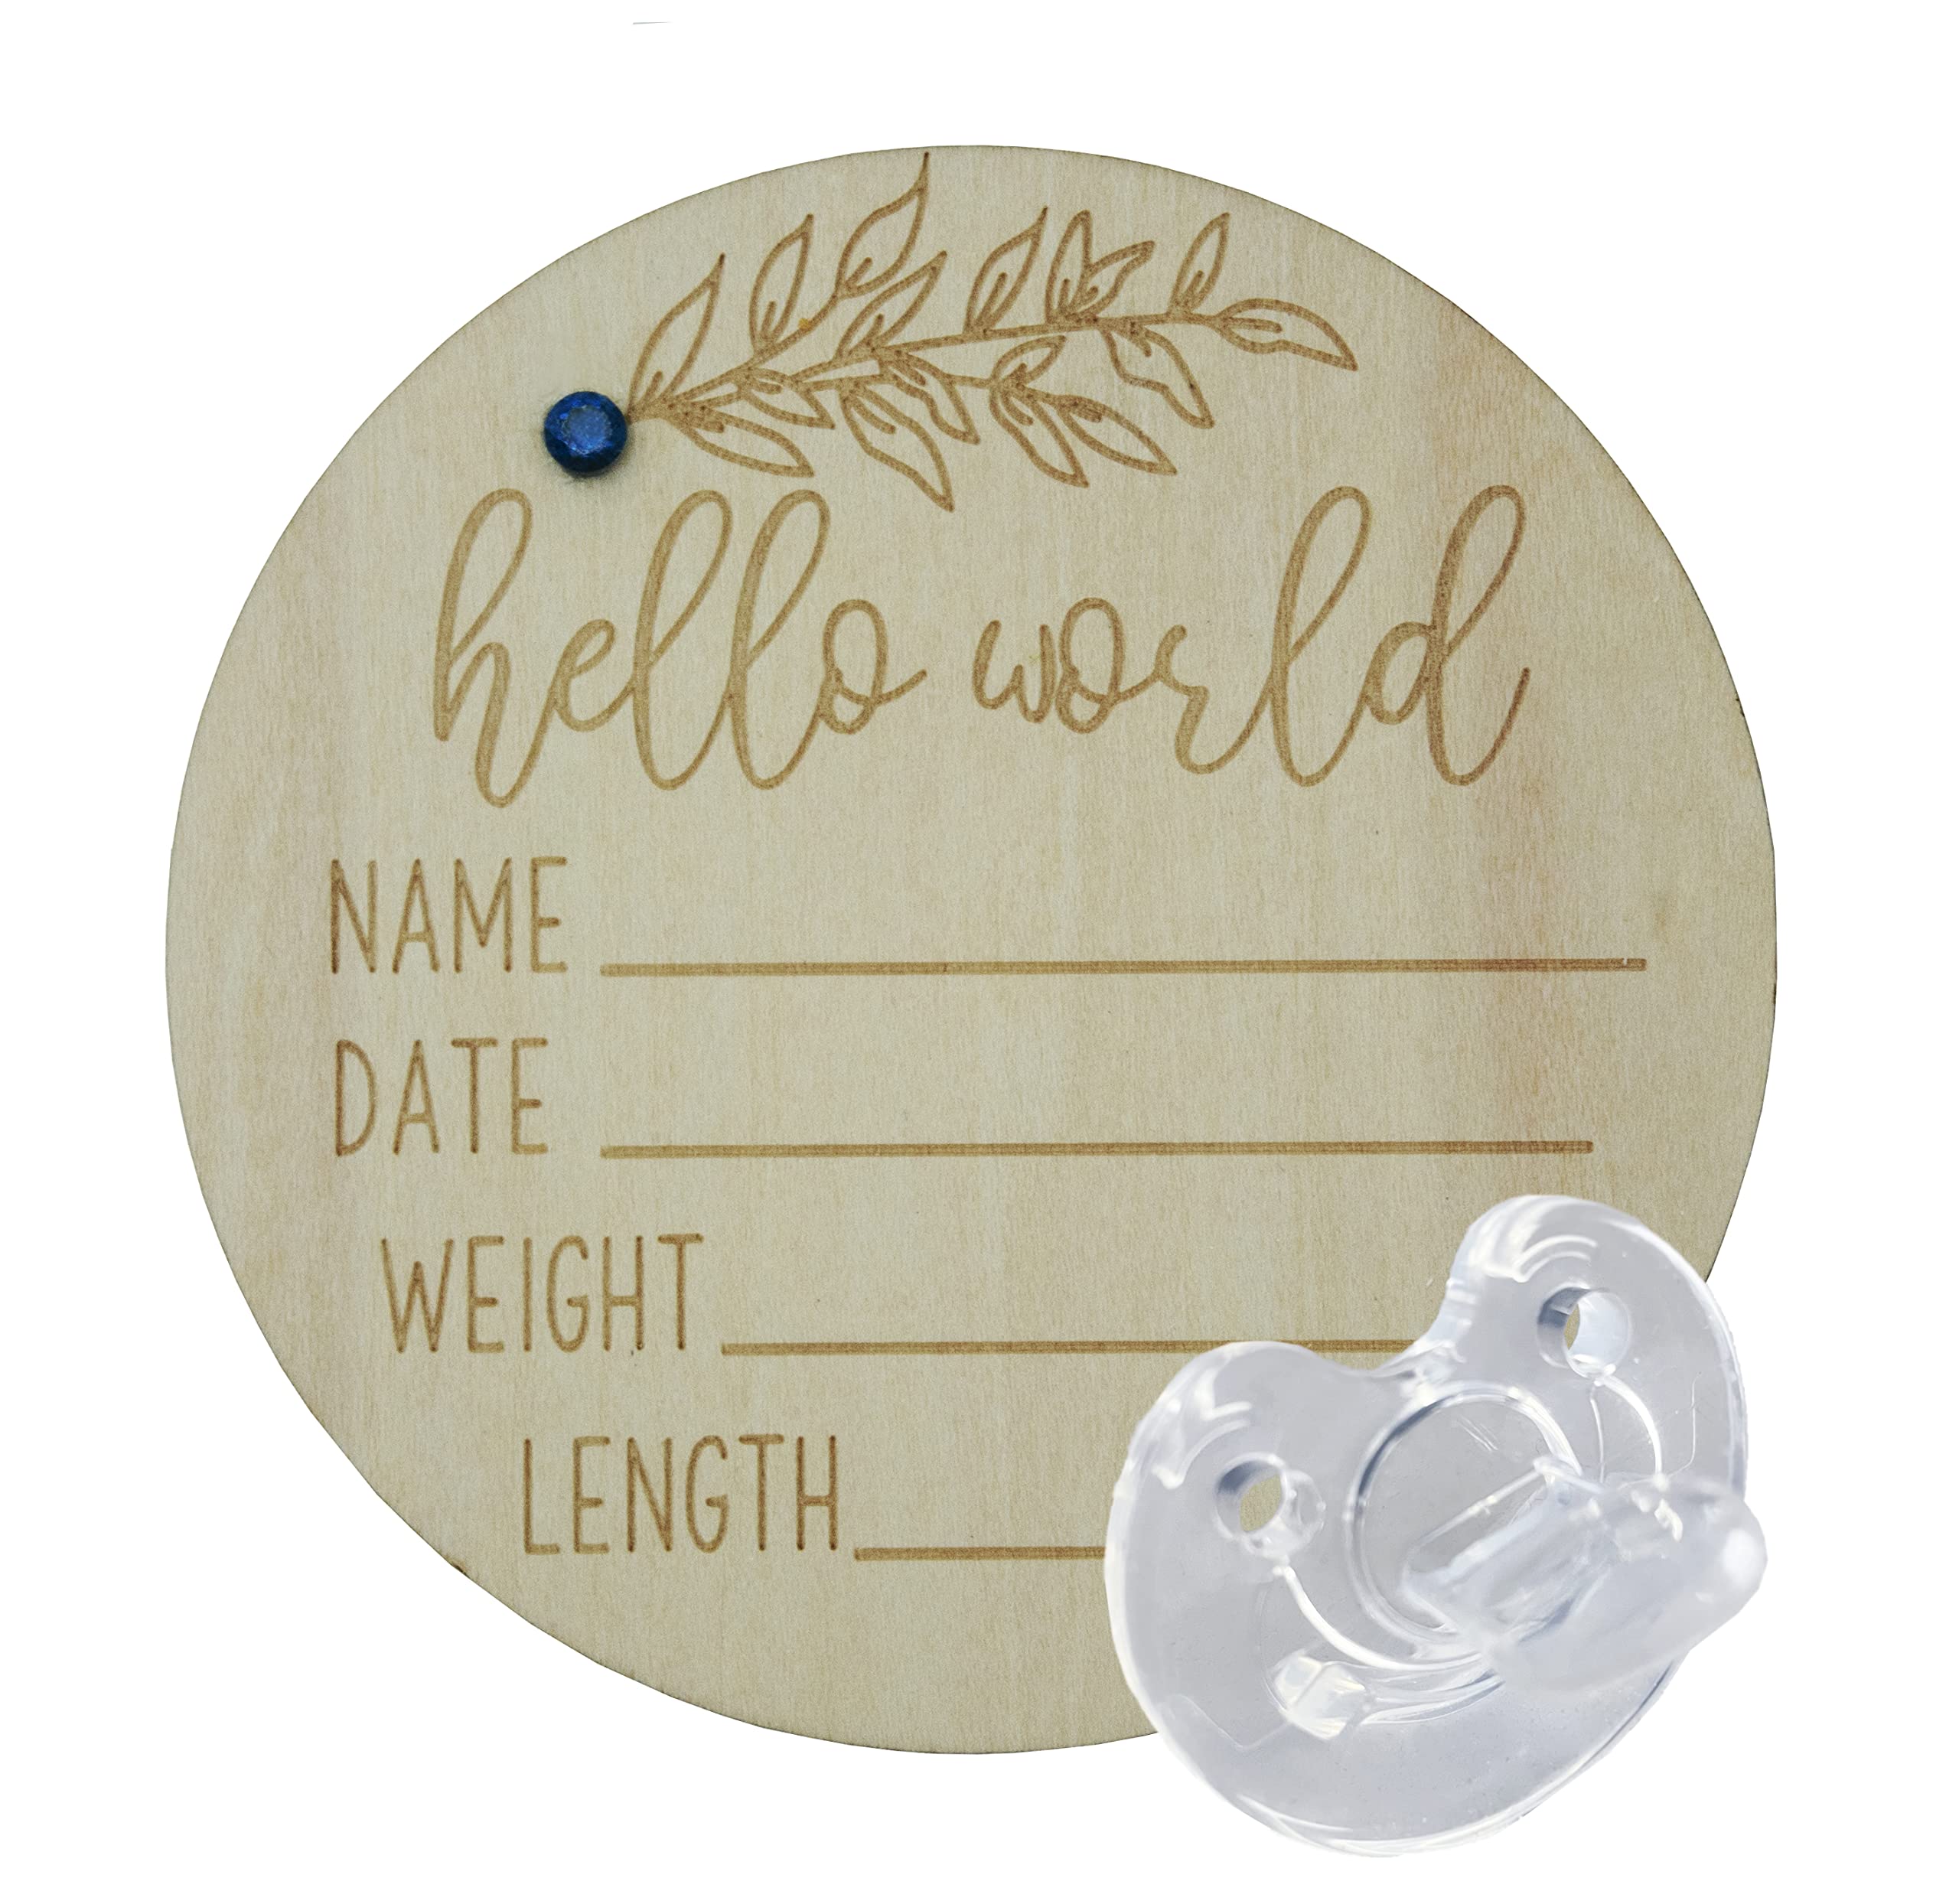 Hello World Baby Announcement Sign with Custom Birthstone and Bonus Free Pen by BABY LUV. Compact 4 Inch Birth announcement sign. Wooden Disc Announcements 1 Count. Newborn sign-Sep